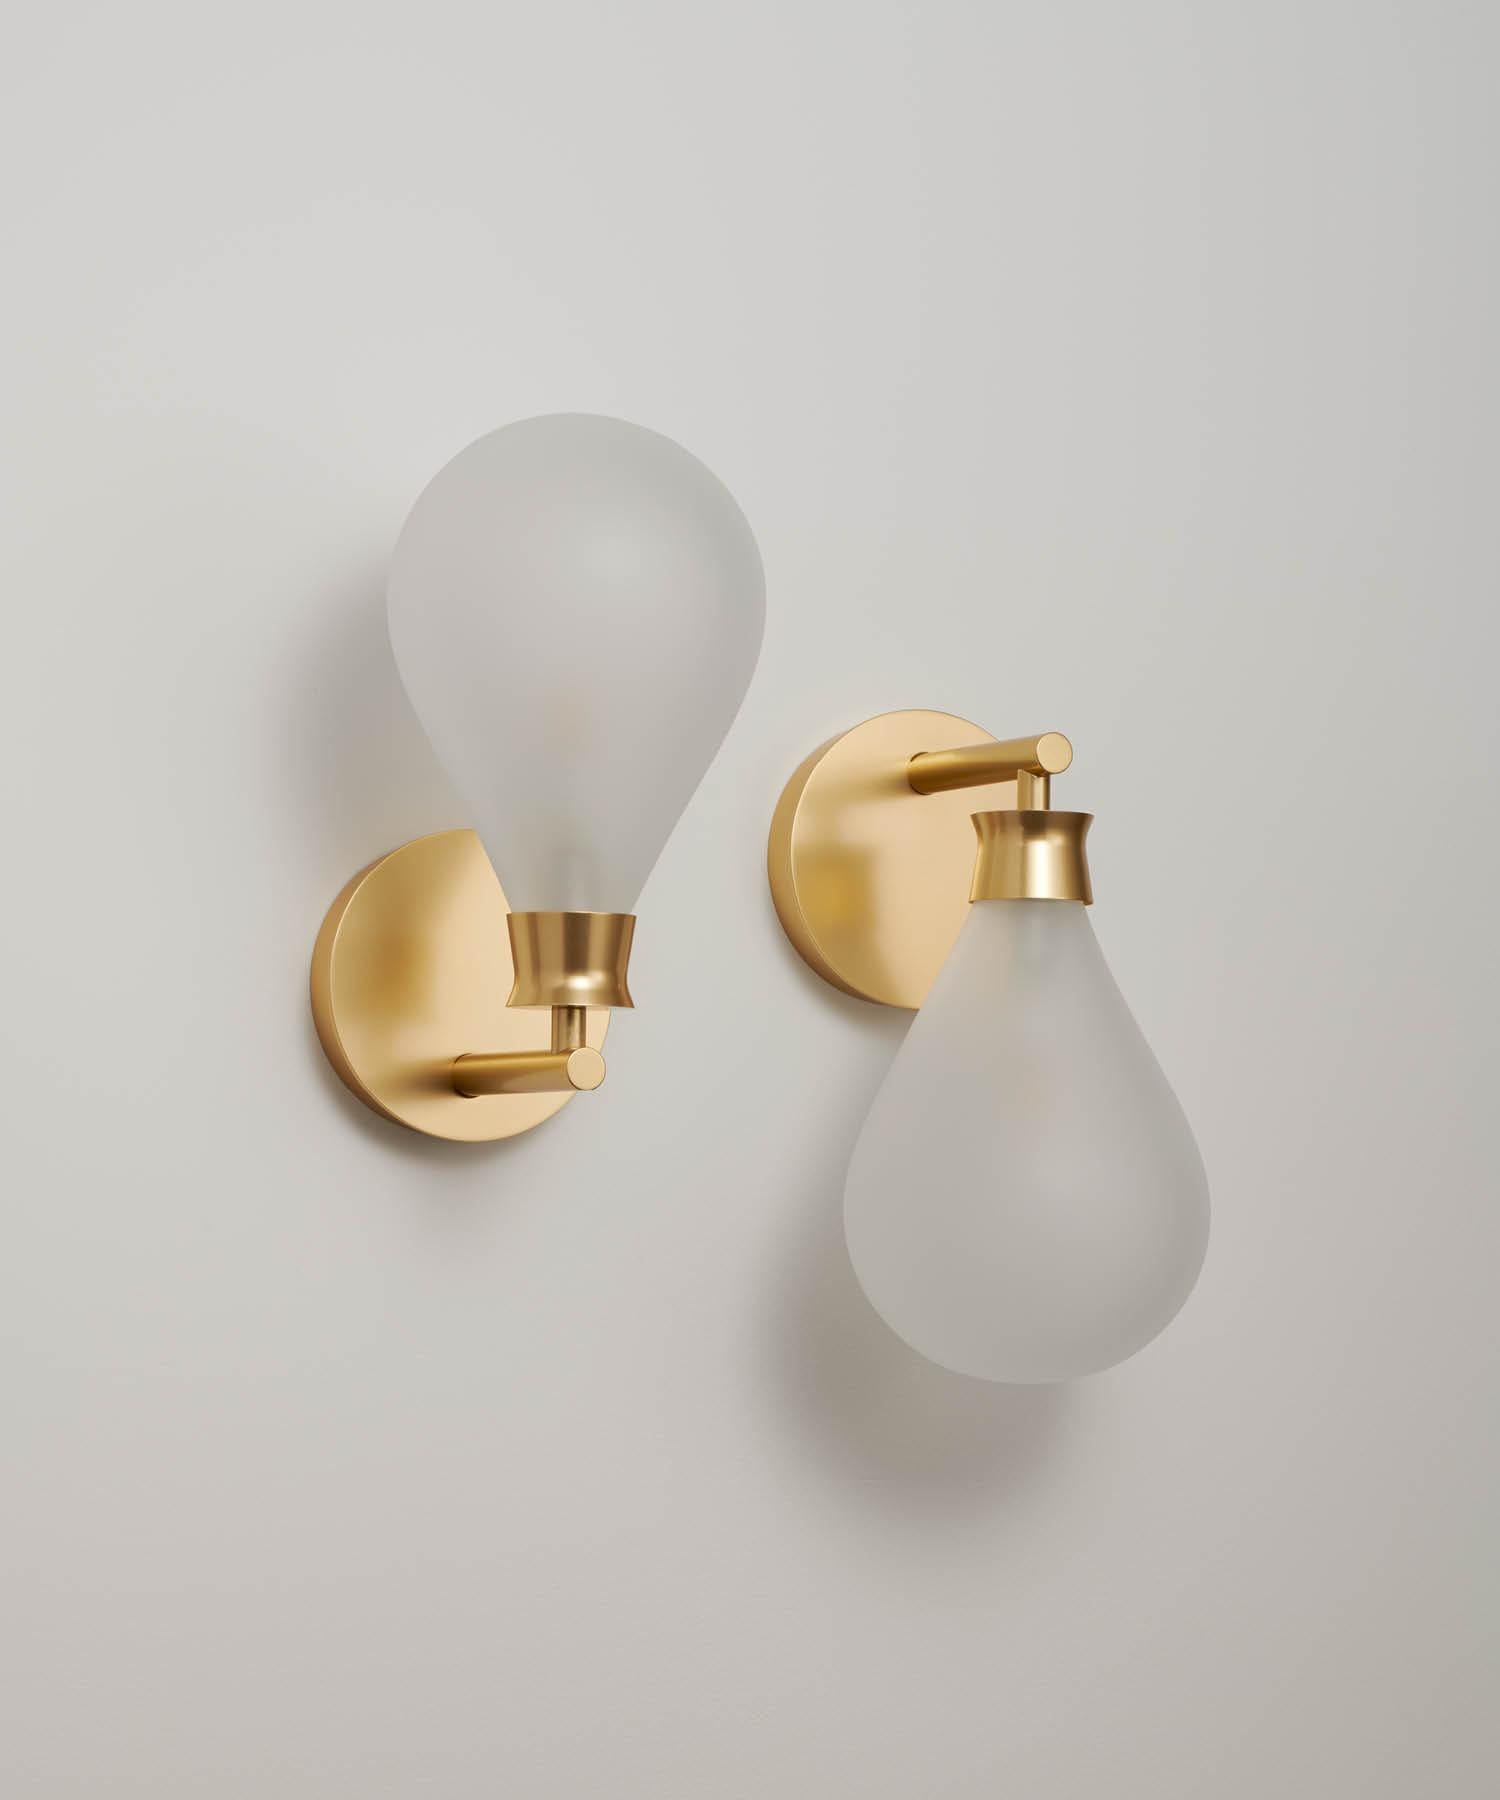 Contemporary Cintola Wall Light in Polished Aluminium with Rose Handblown Glass Globe